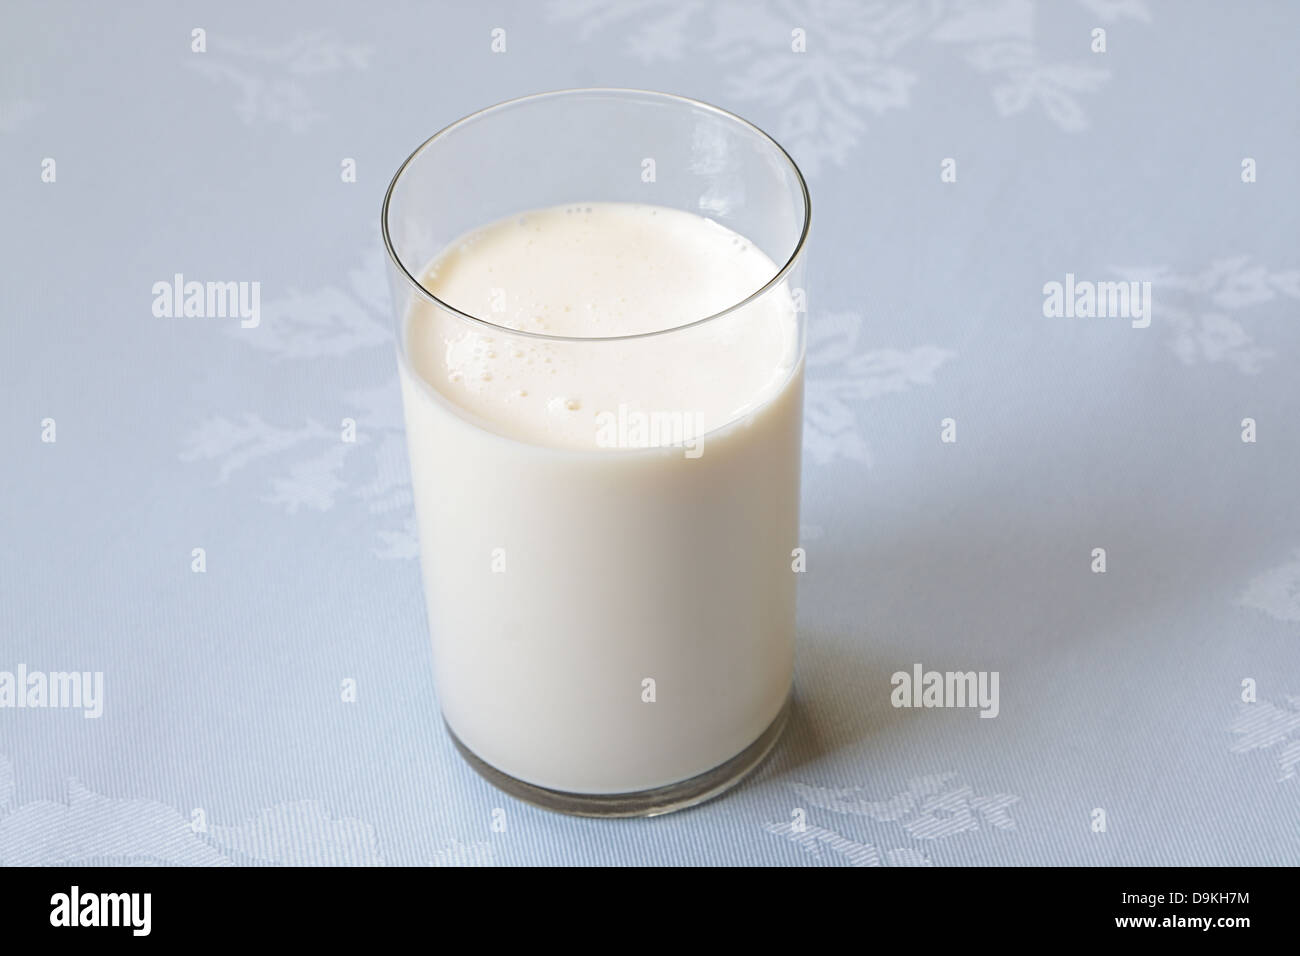 Fermented milk product in a glass on the table Stock Photo